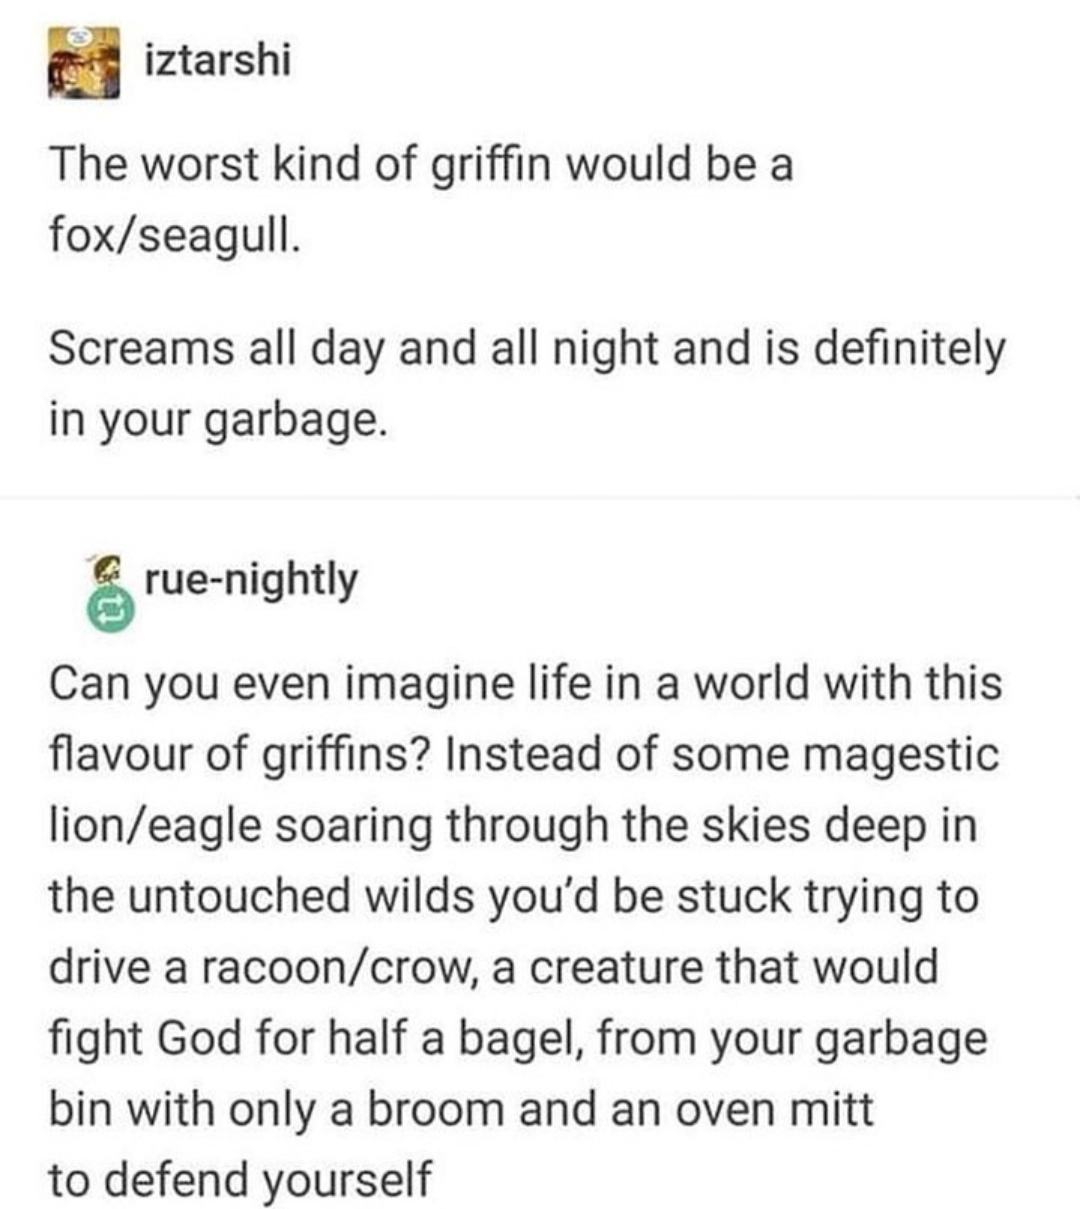 seagull griffon - iztarshi The worst kind of griffin would be a foxseagull. Screams all day and all night and is definitely in your garbage. ruenightly Can you even imagine life in a world with this flavour of griffins? Instead of some magestic lioneagle 